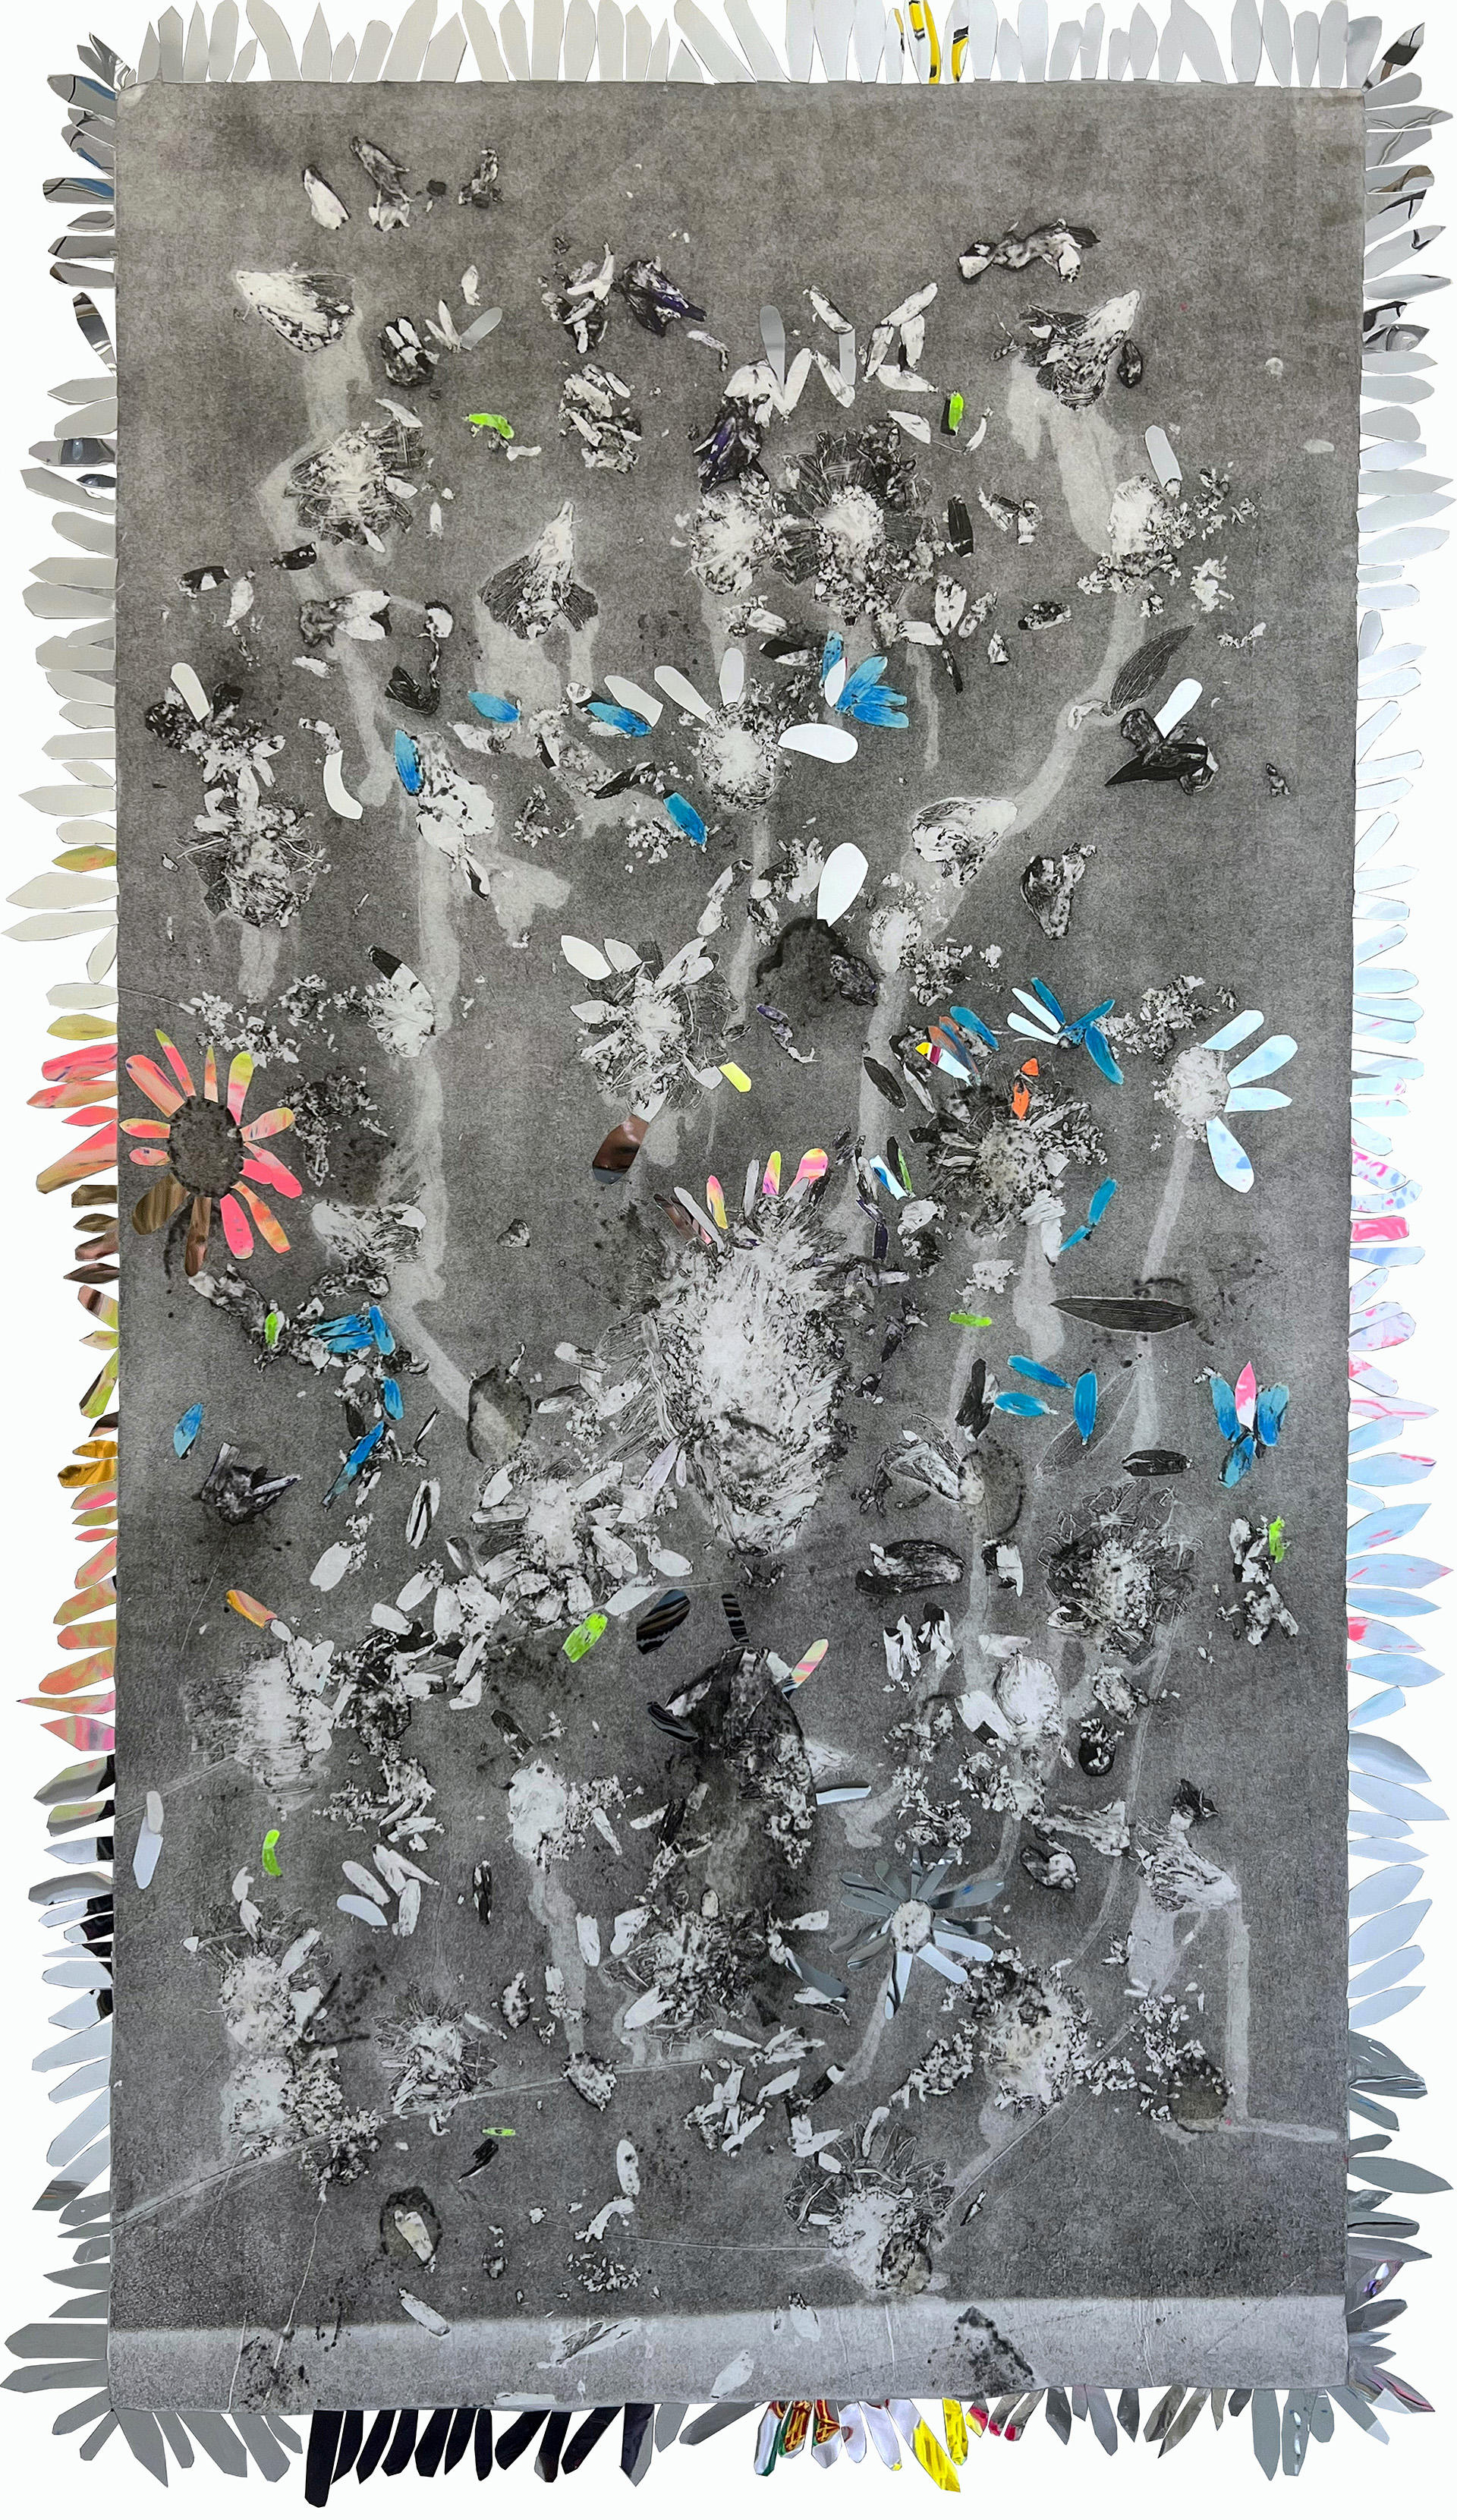 A cosmic monotype print that permits the viewer to interact with the piece.